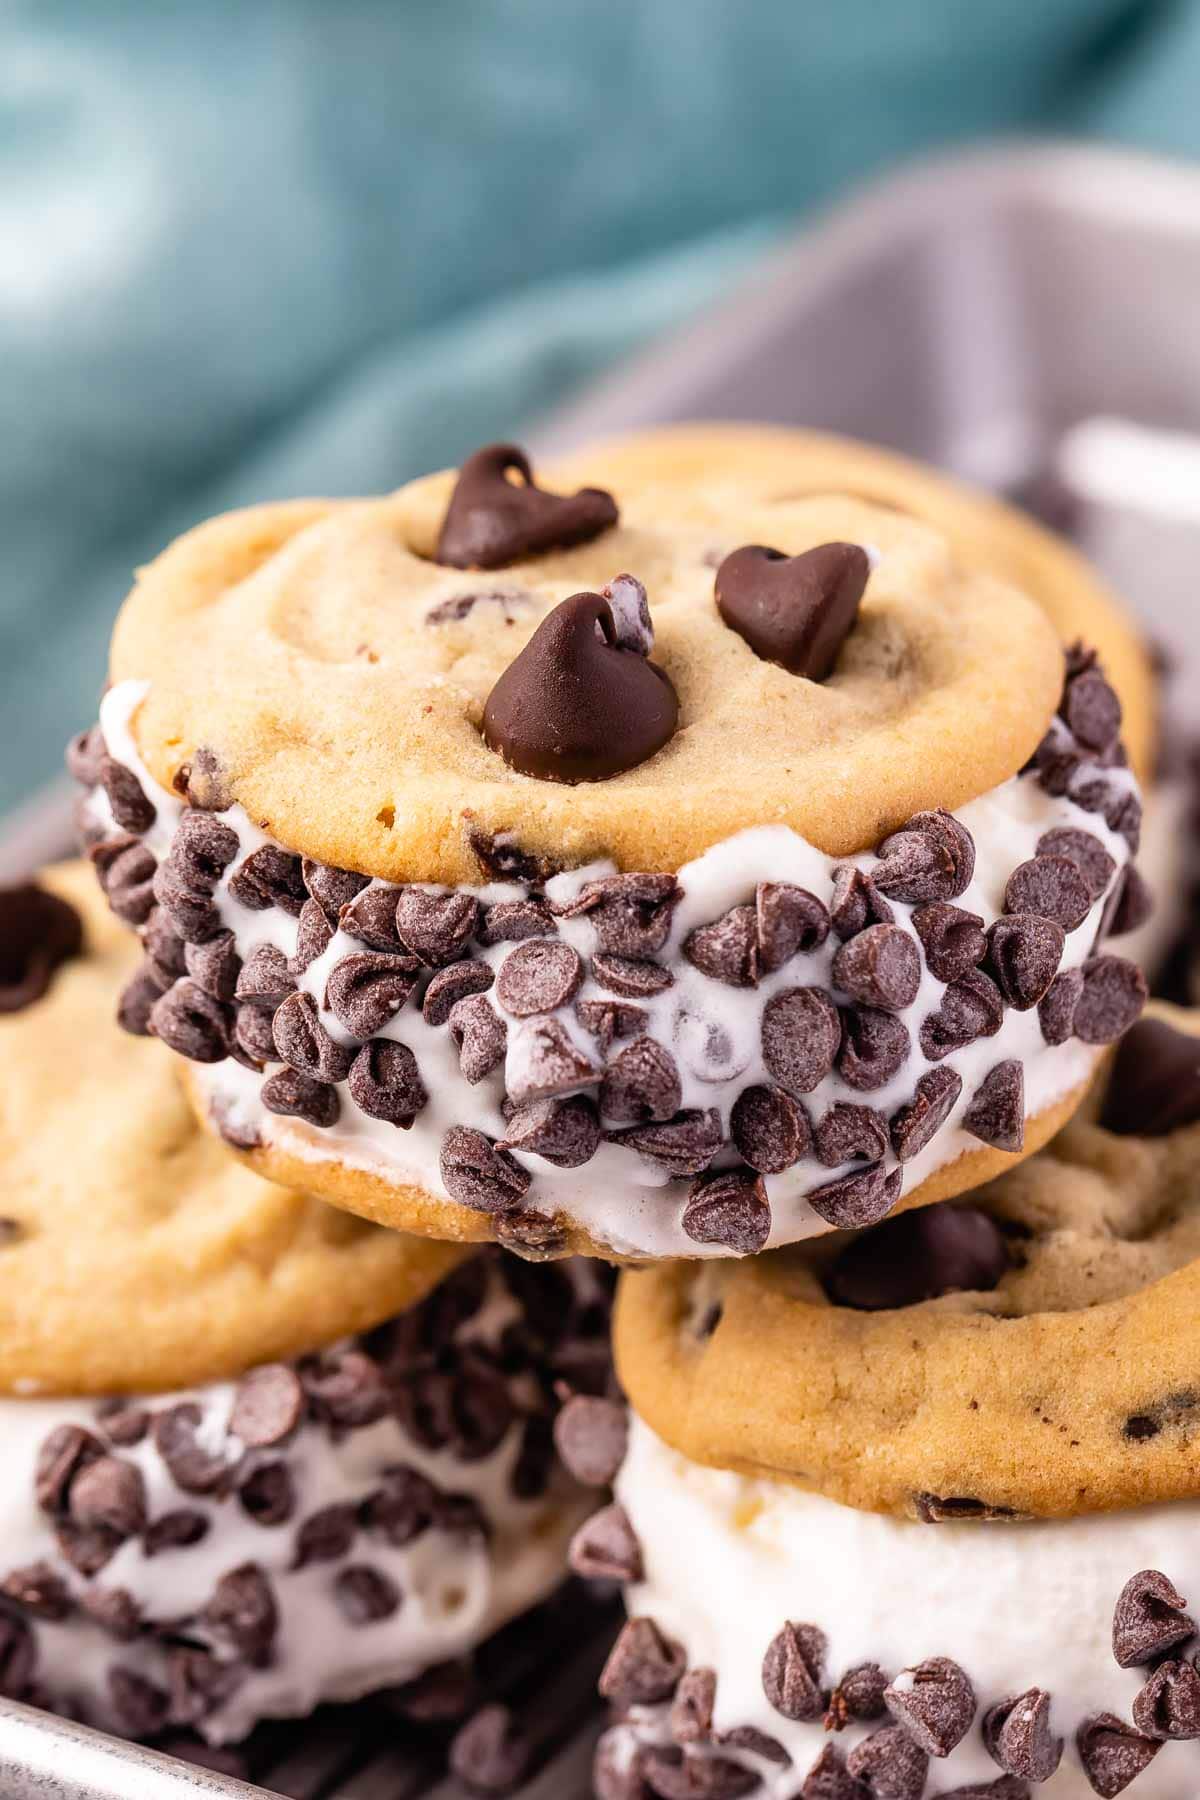 Cookie Ice Cream Sandwiches (Like A Chipwich!) - Sally's Baking